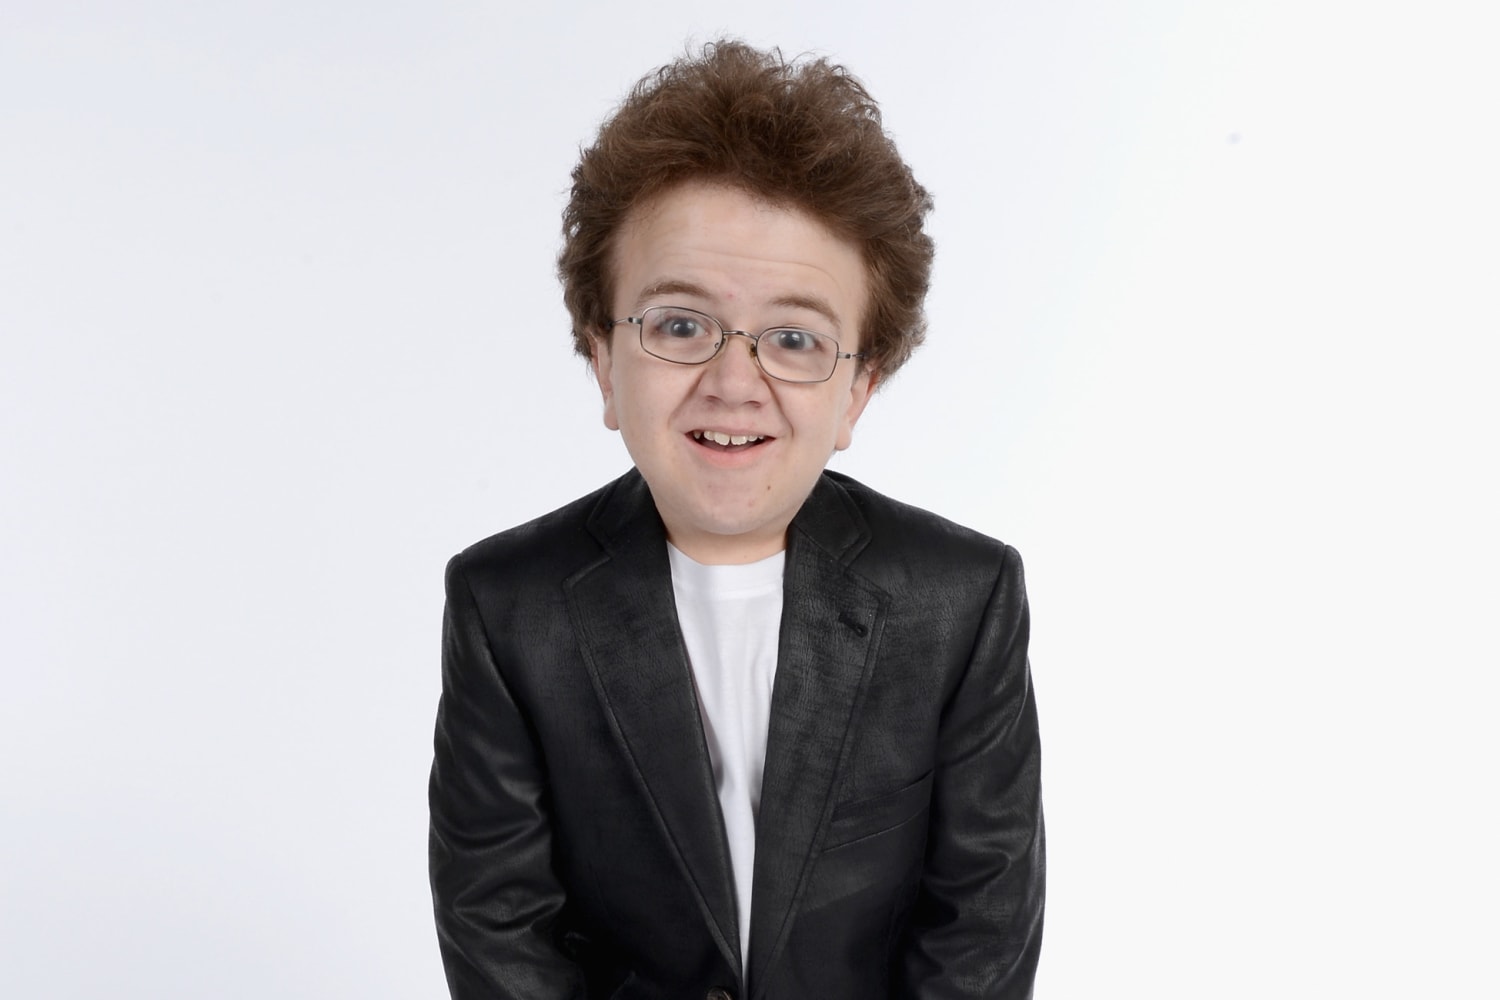 Keenan Cahill, YouTube creator who made videos lip-syncing with celebrities, dies at 27